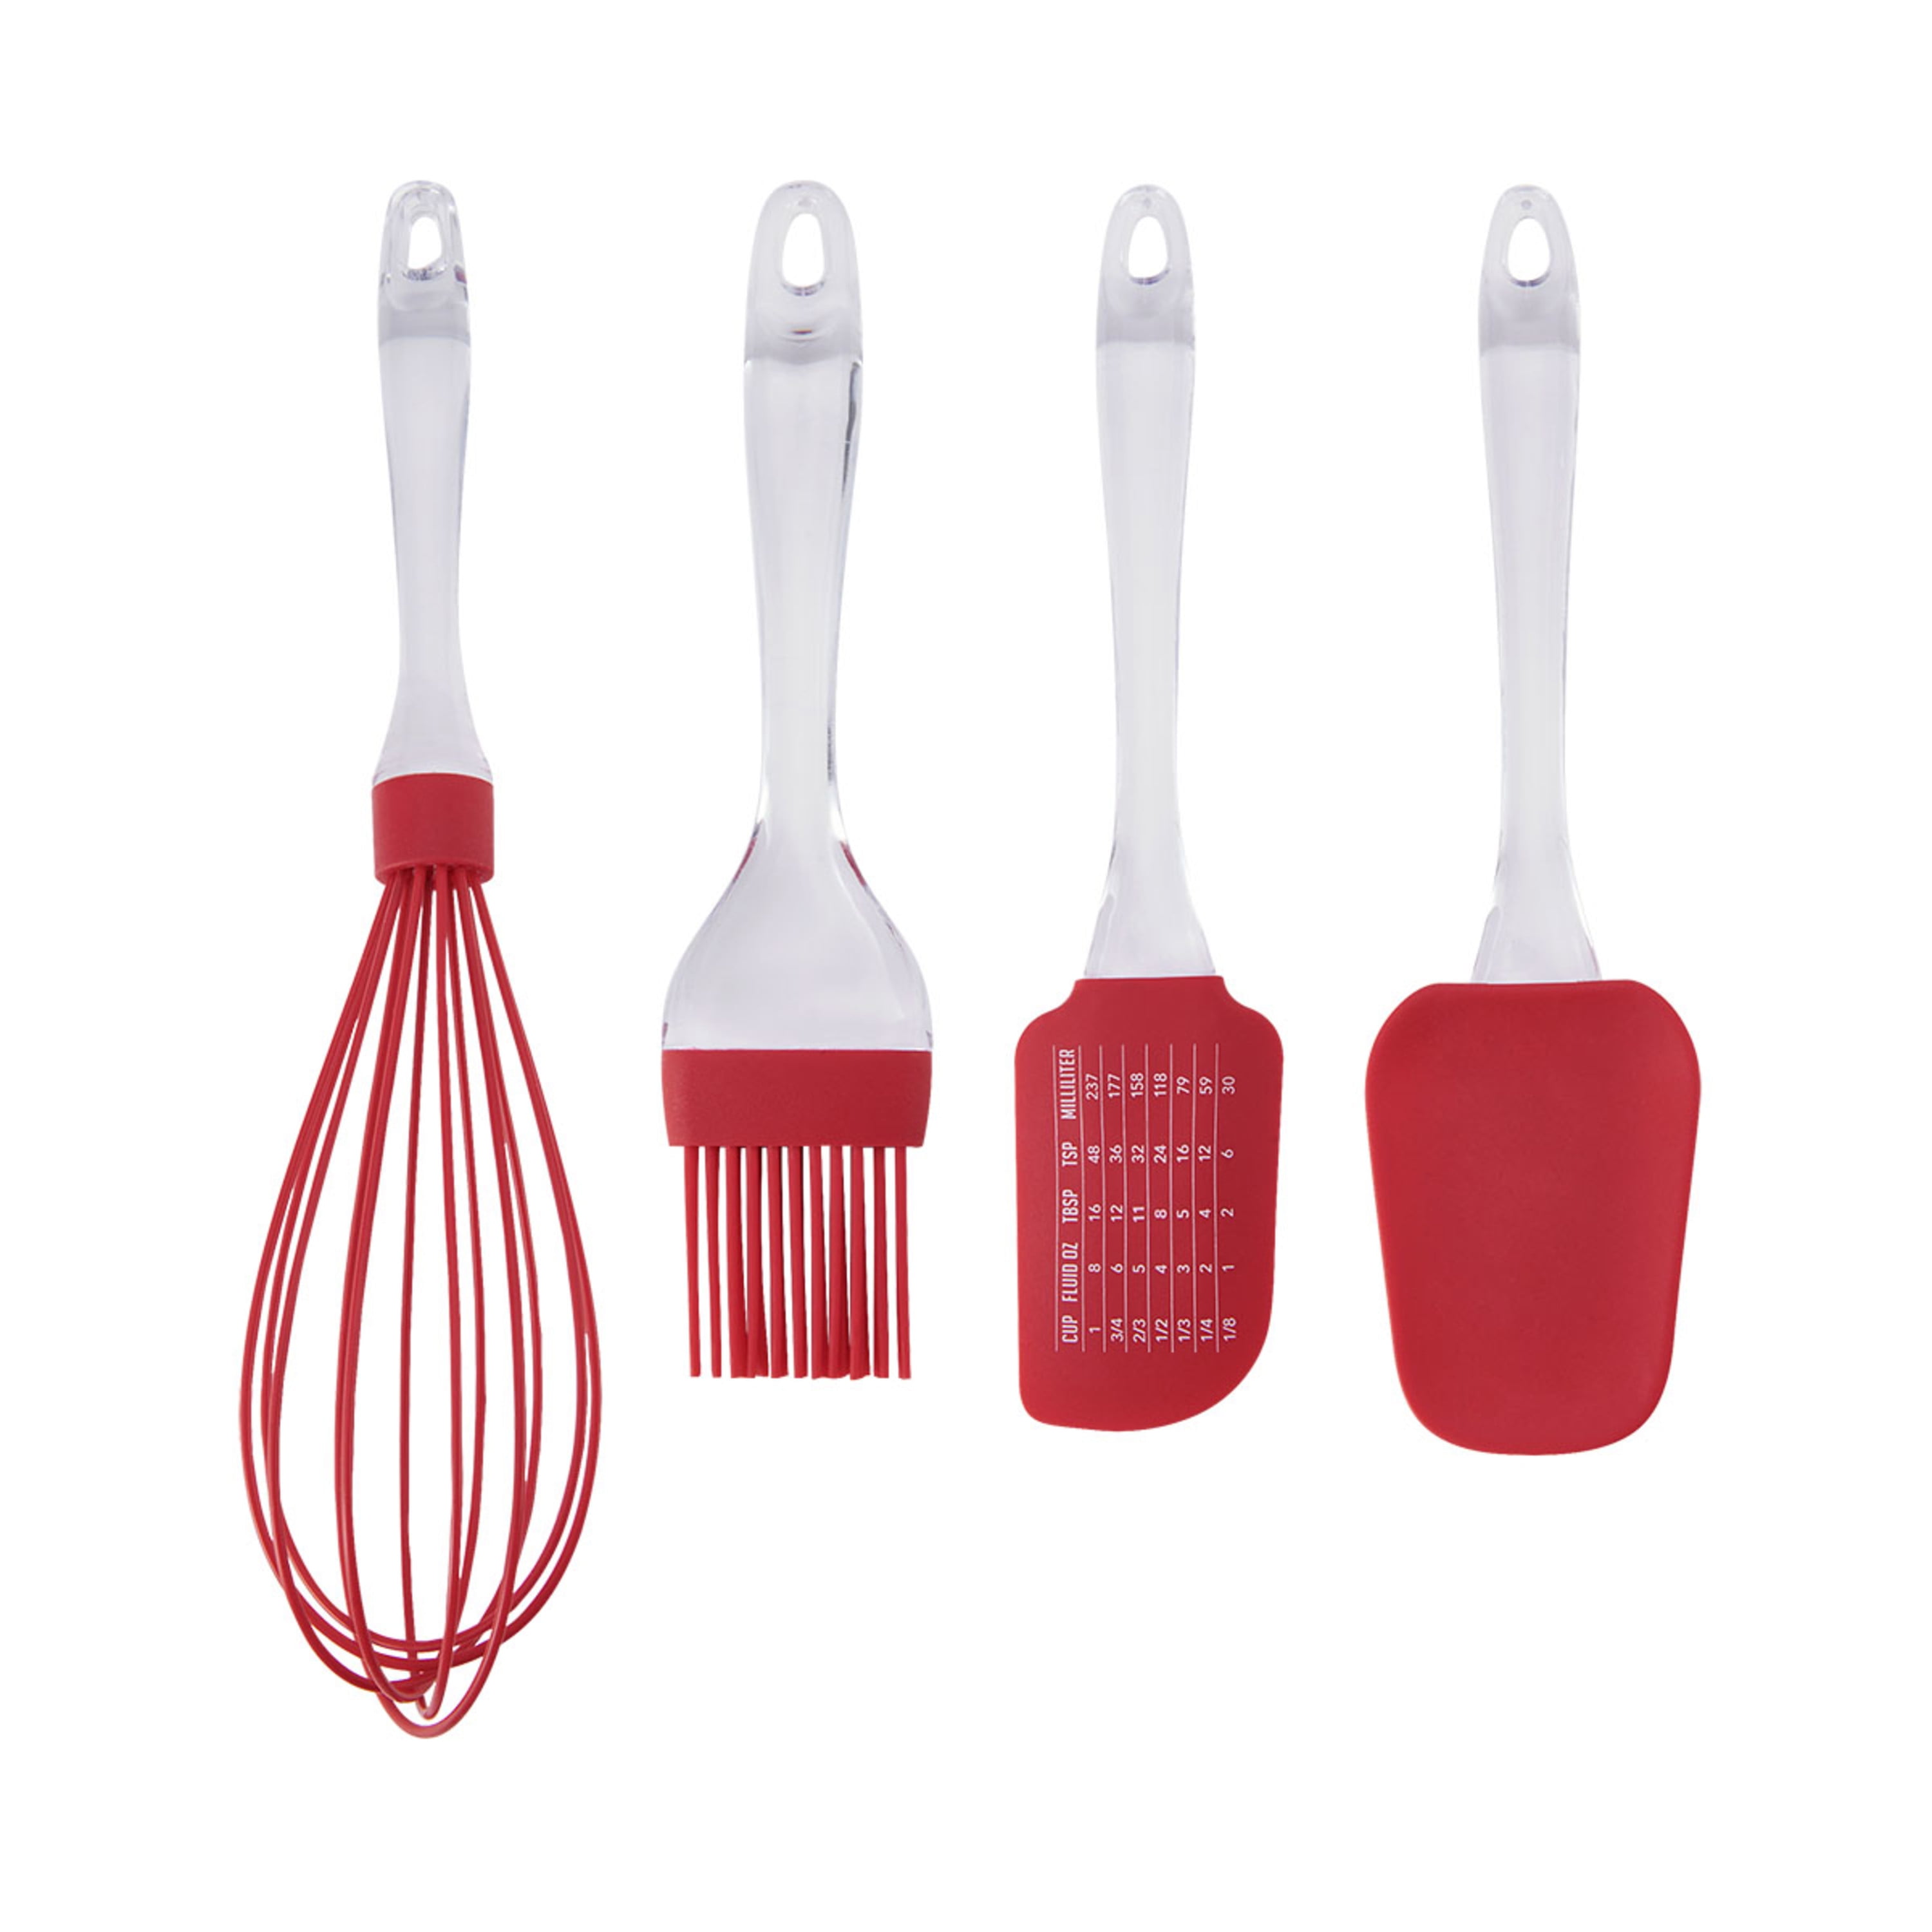 Farberware Professional Silicone Basting Brush Red with Black Handle